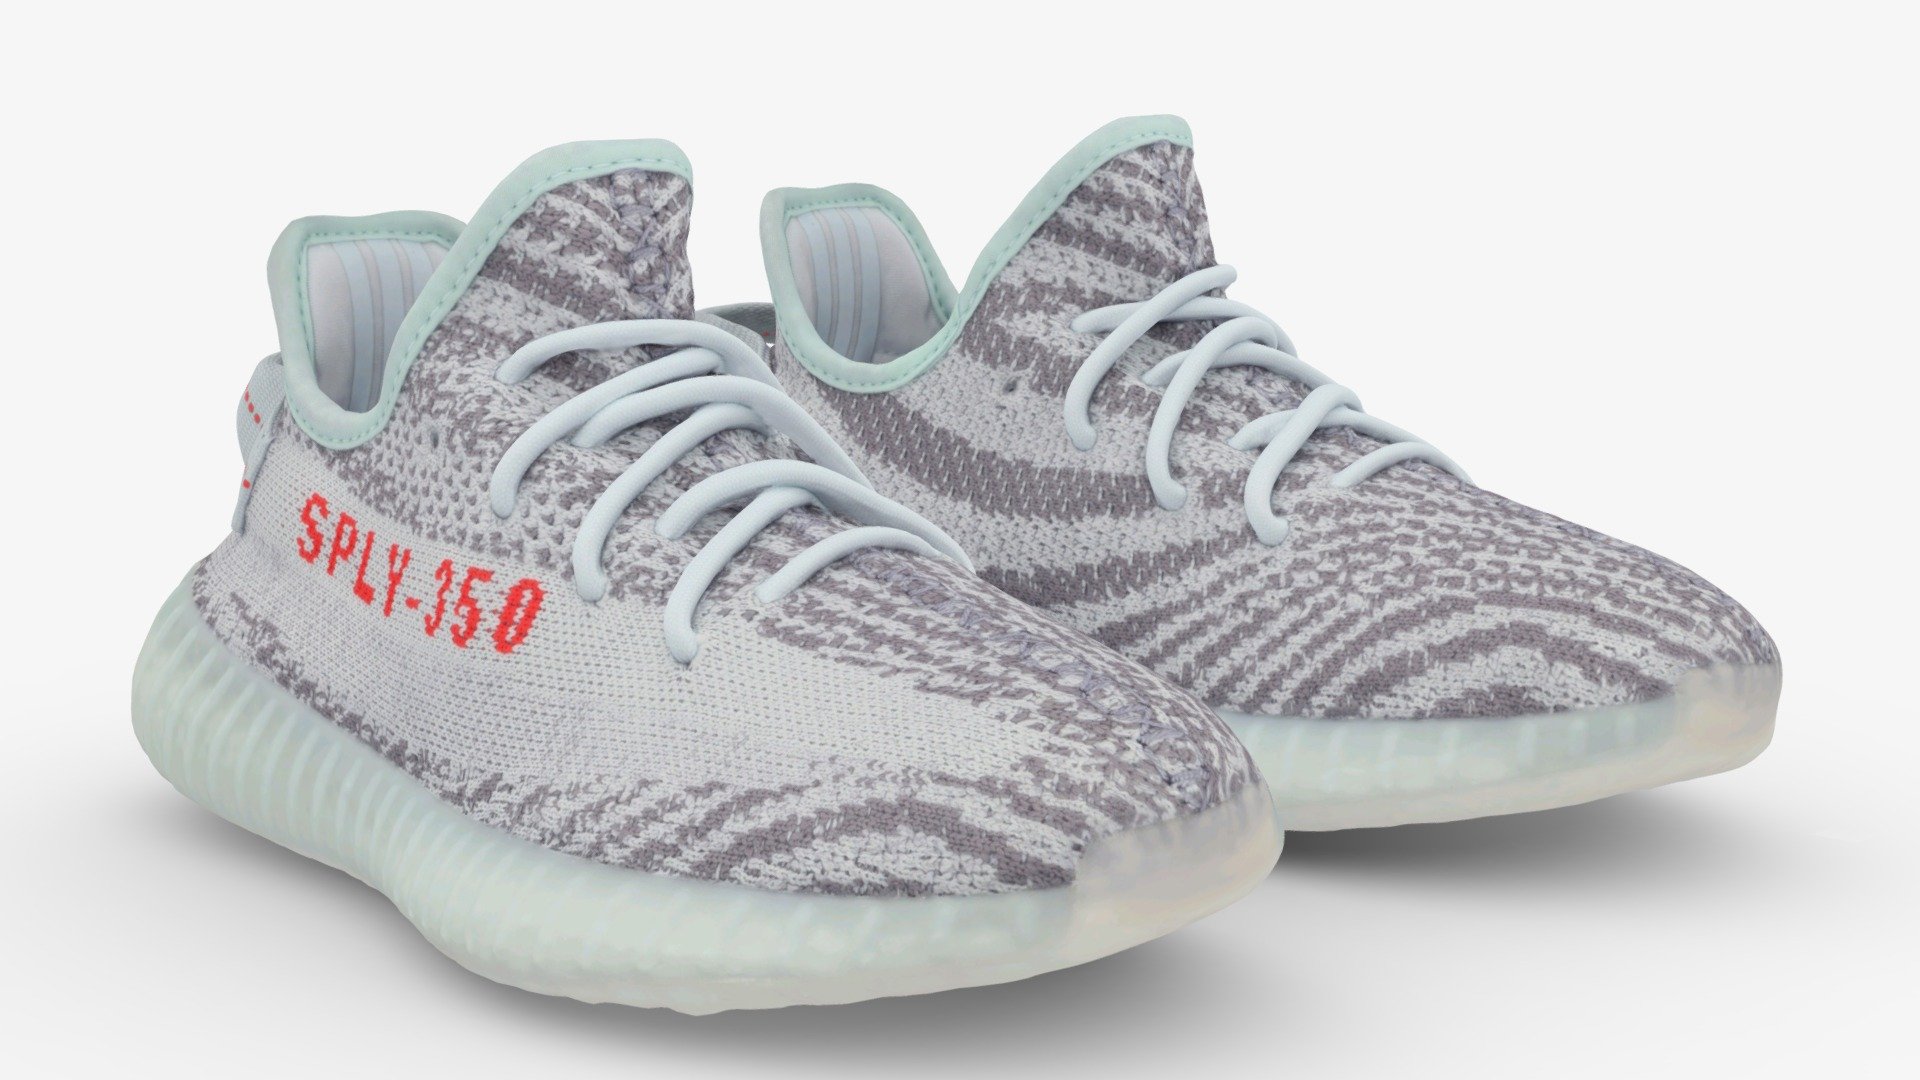 A Very Detailed shoes with High-Quality .

The Mesh is UV unwrapped.

4096x4096 Texture Maps jpg，in the compressed file rar.

File Formats :

FBX .OBJ .stl.collada(dae).Maya2019,Texture(jpg format).

If you want to modify the color of the shoes, it is easy to do with photopshop. The screenshot shows how to do it.

This is a professional scanning agency, if there are any shoes that are not included, please let me know.My E-mail:951723610@qq.com,It will helps a lot.By the way,we are available for custom shoes scan.

Don't forget to check my other sneakers,Have a nice day：） - adidas originals Yeezy 350 - Buy Royalty Free 3D model by Vincent Page (@vincentpage) 3d model